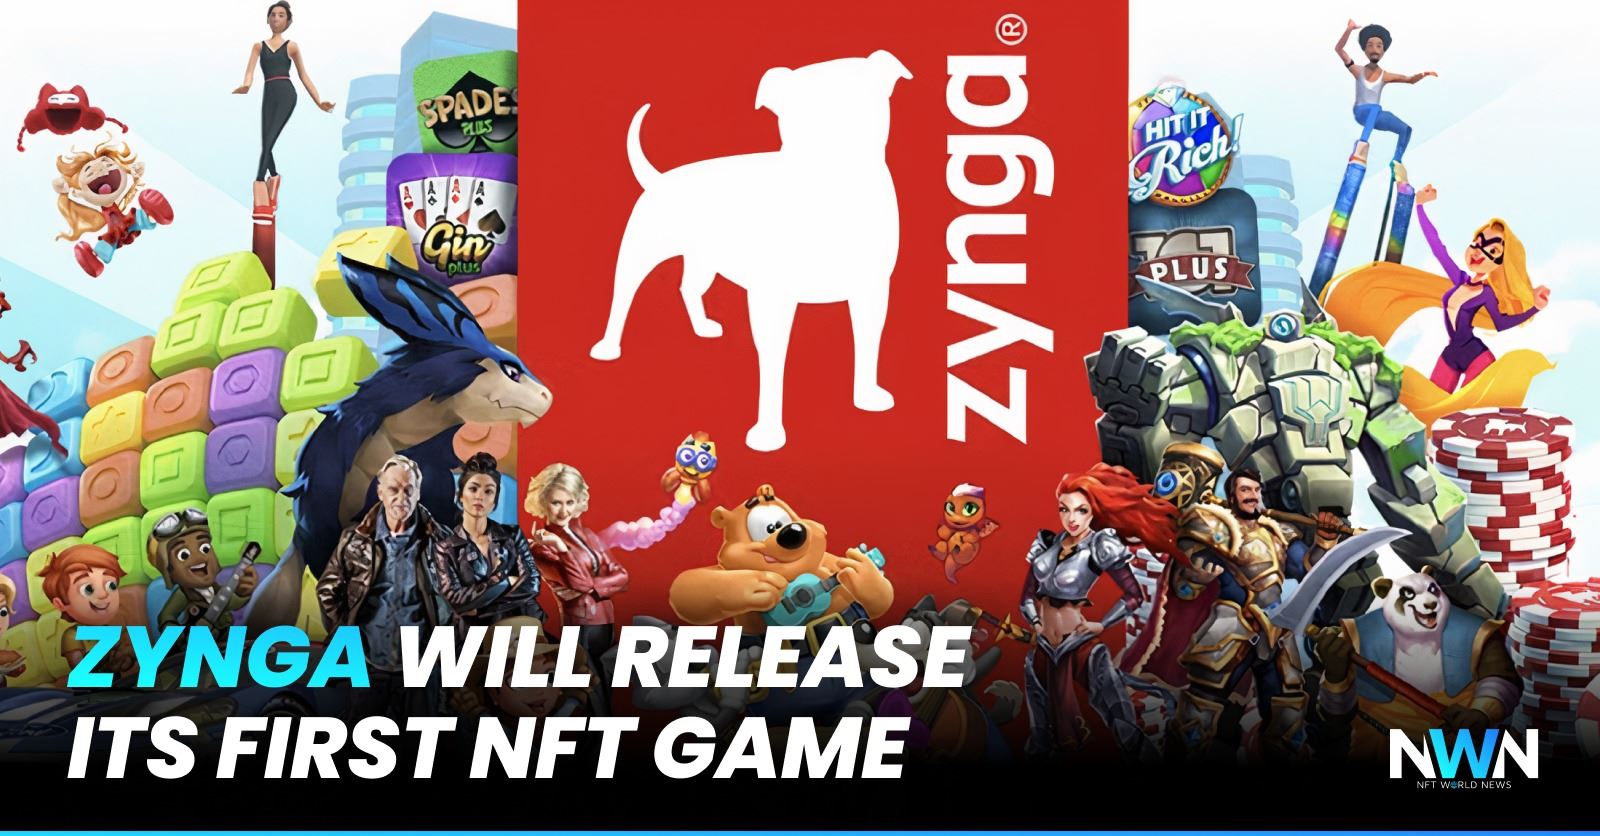 Zynga Will Release Its First NFT Game